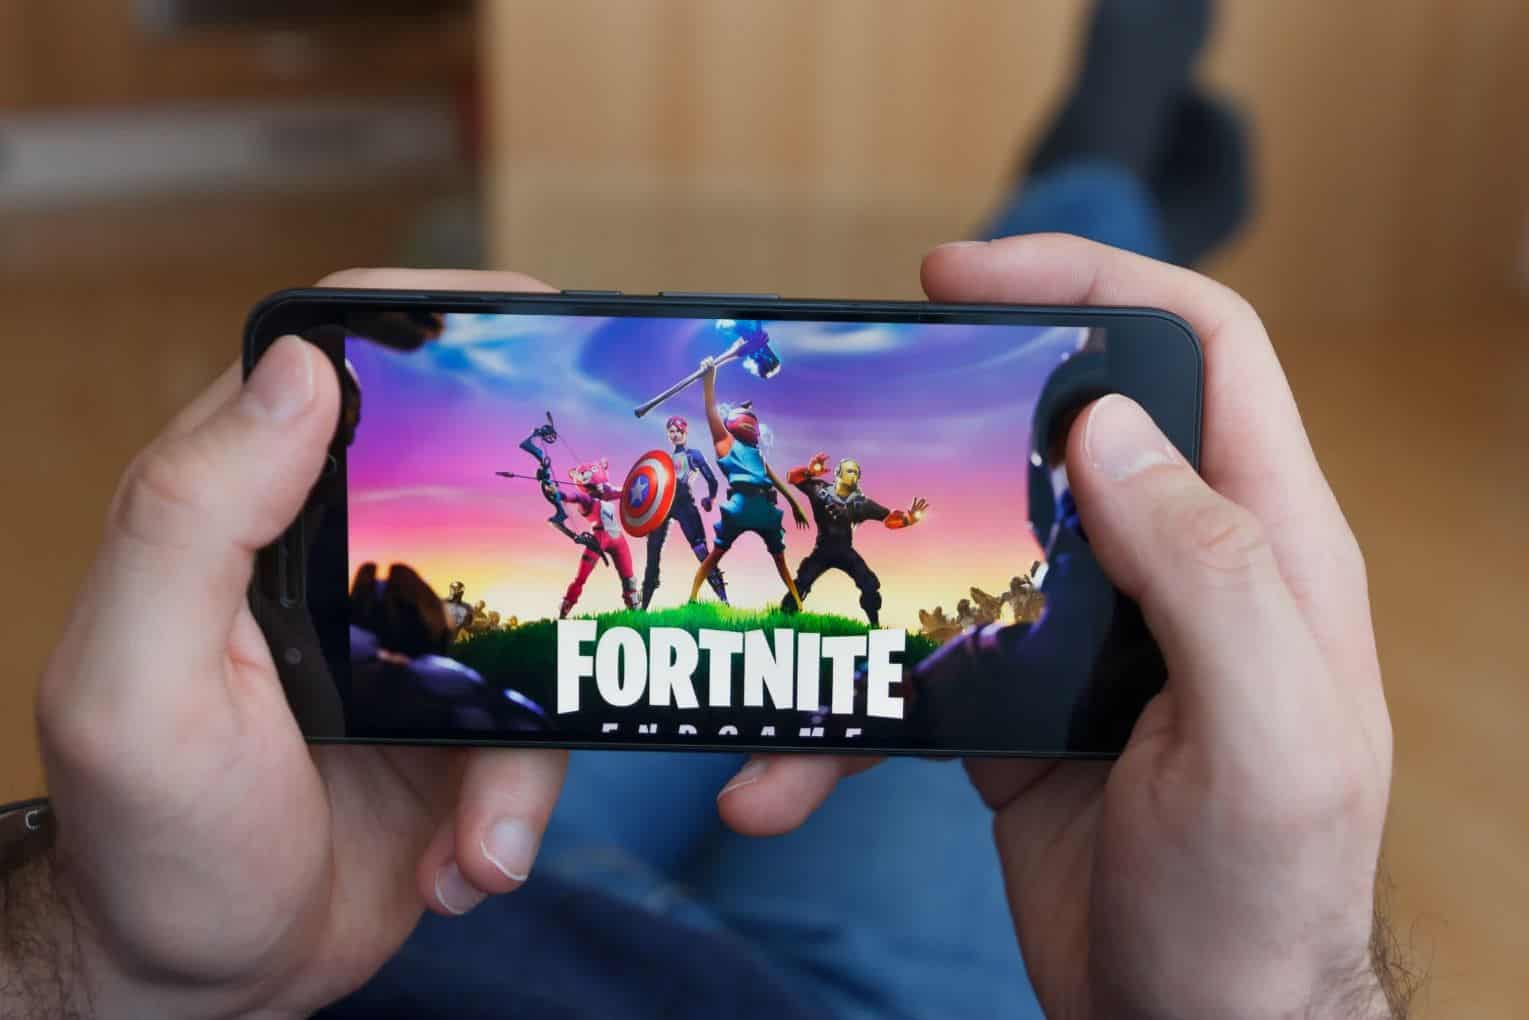 fortnite-will-soon-return-to-iphones-and-ipads-via-nvidia-geforce-now-report